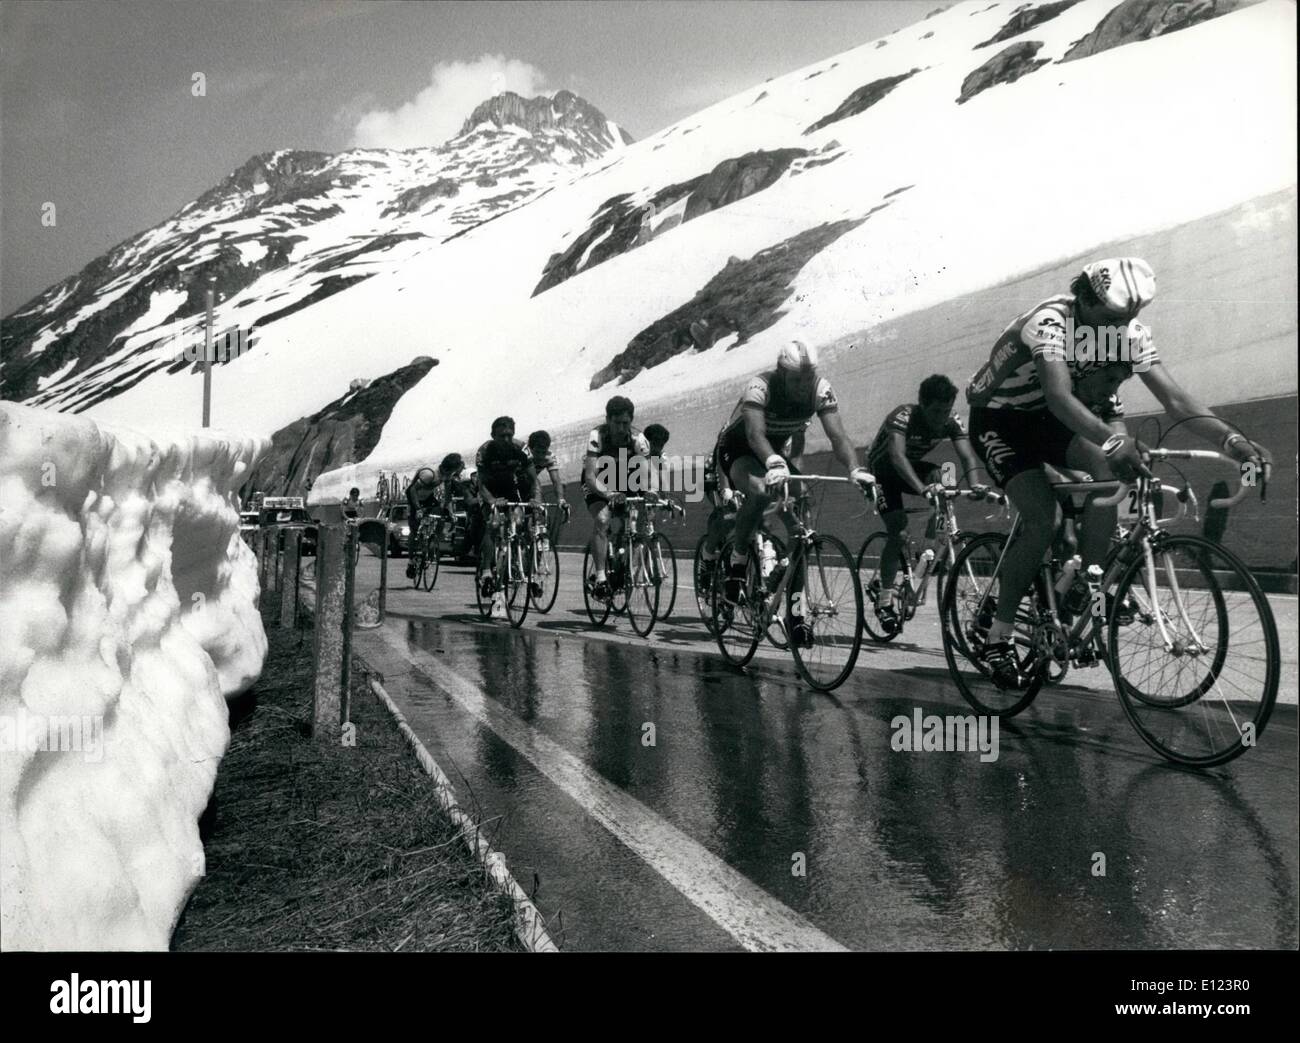 Jun. 06, 1984 - Snow walls on the Saint Gotthard Pass: Cyclists of the ''Tour de Suisse'' pass through big snow walls on both sides of the street on the Saint Gotthard pass (Swiss alps) during the 5th lap of this cycling race Monday. Stock Photo